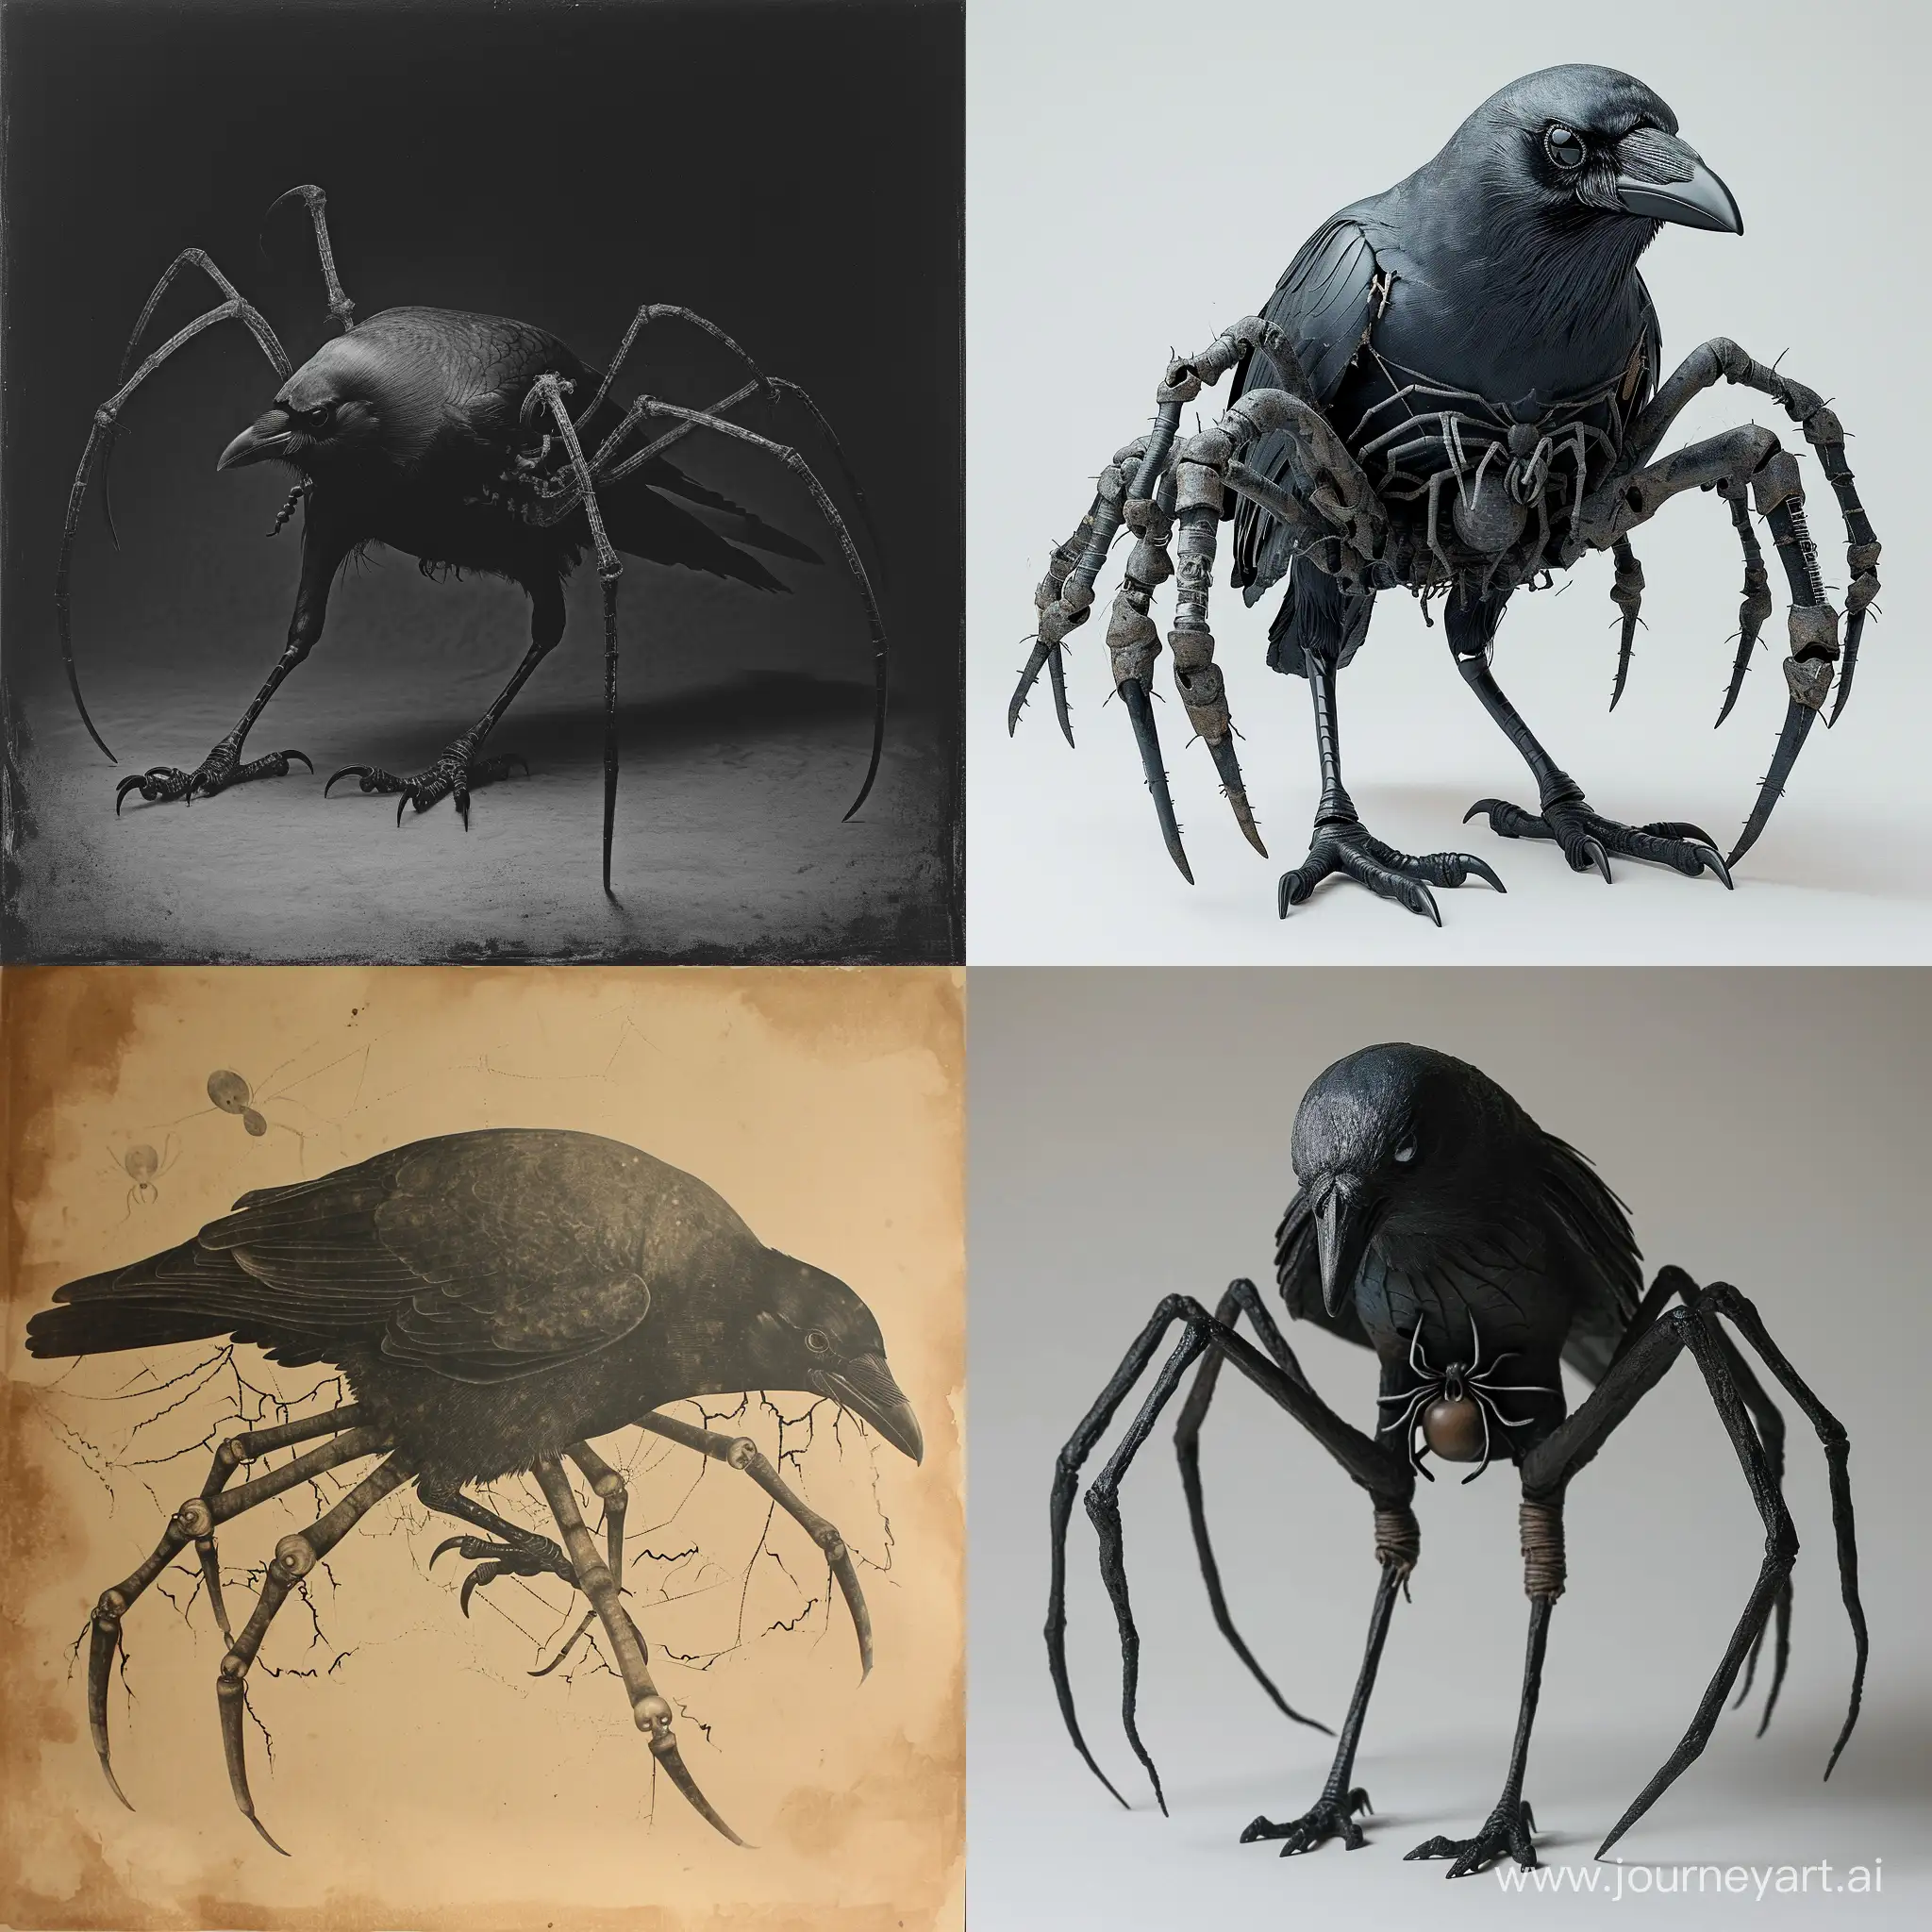 crow with spider legs and human arms